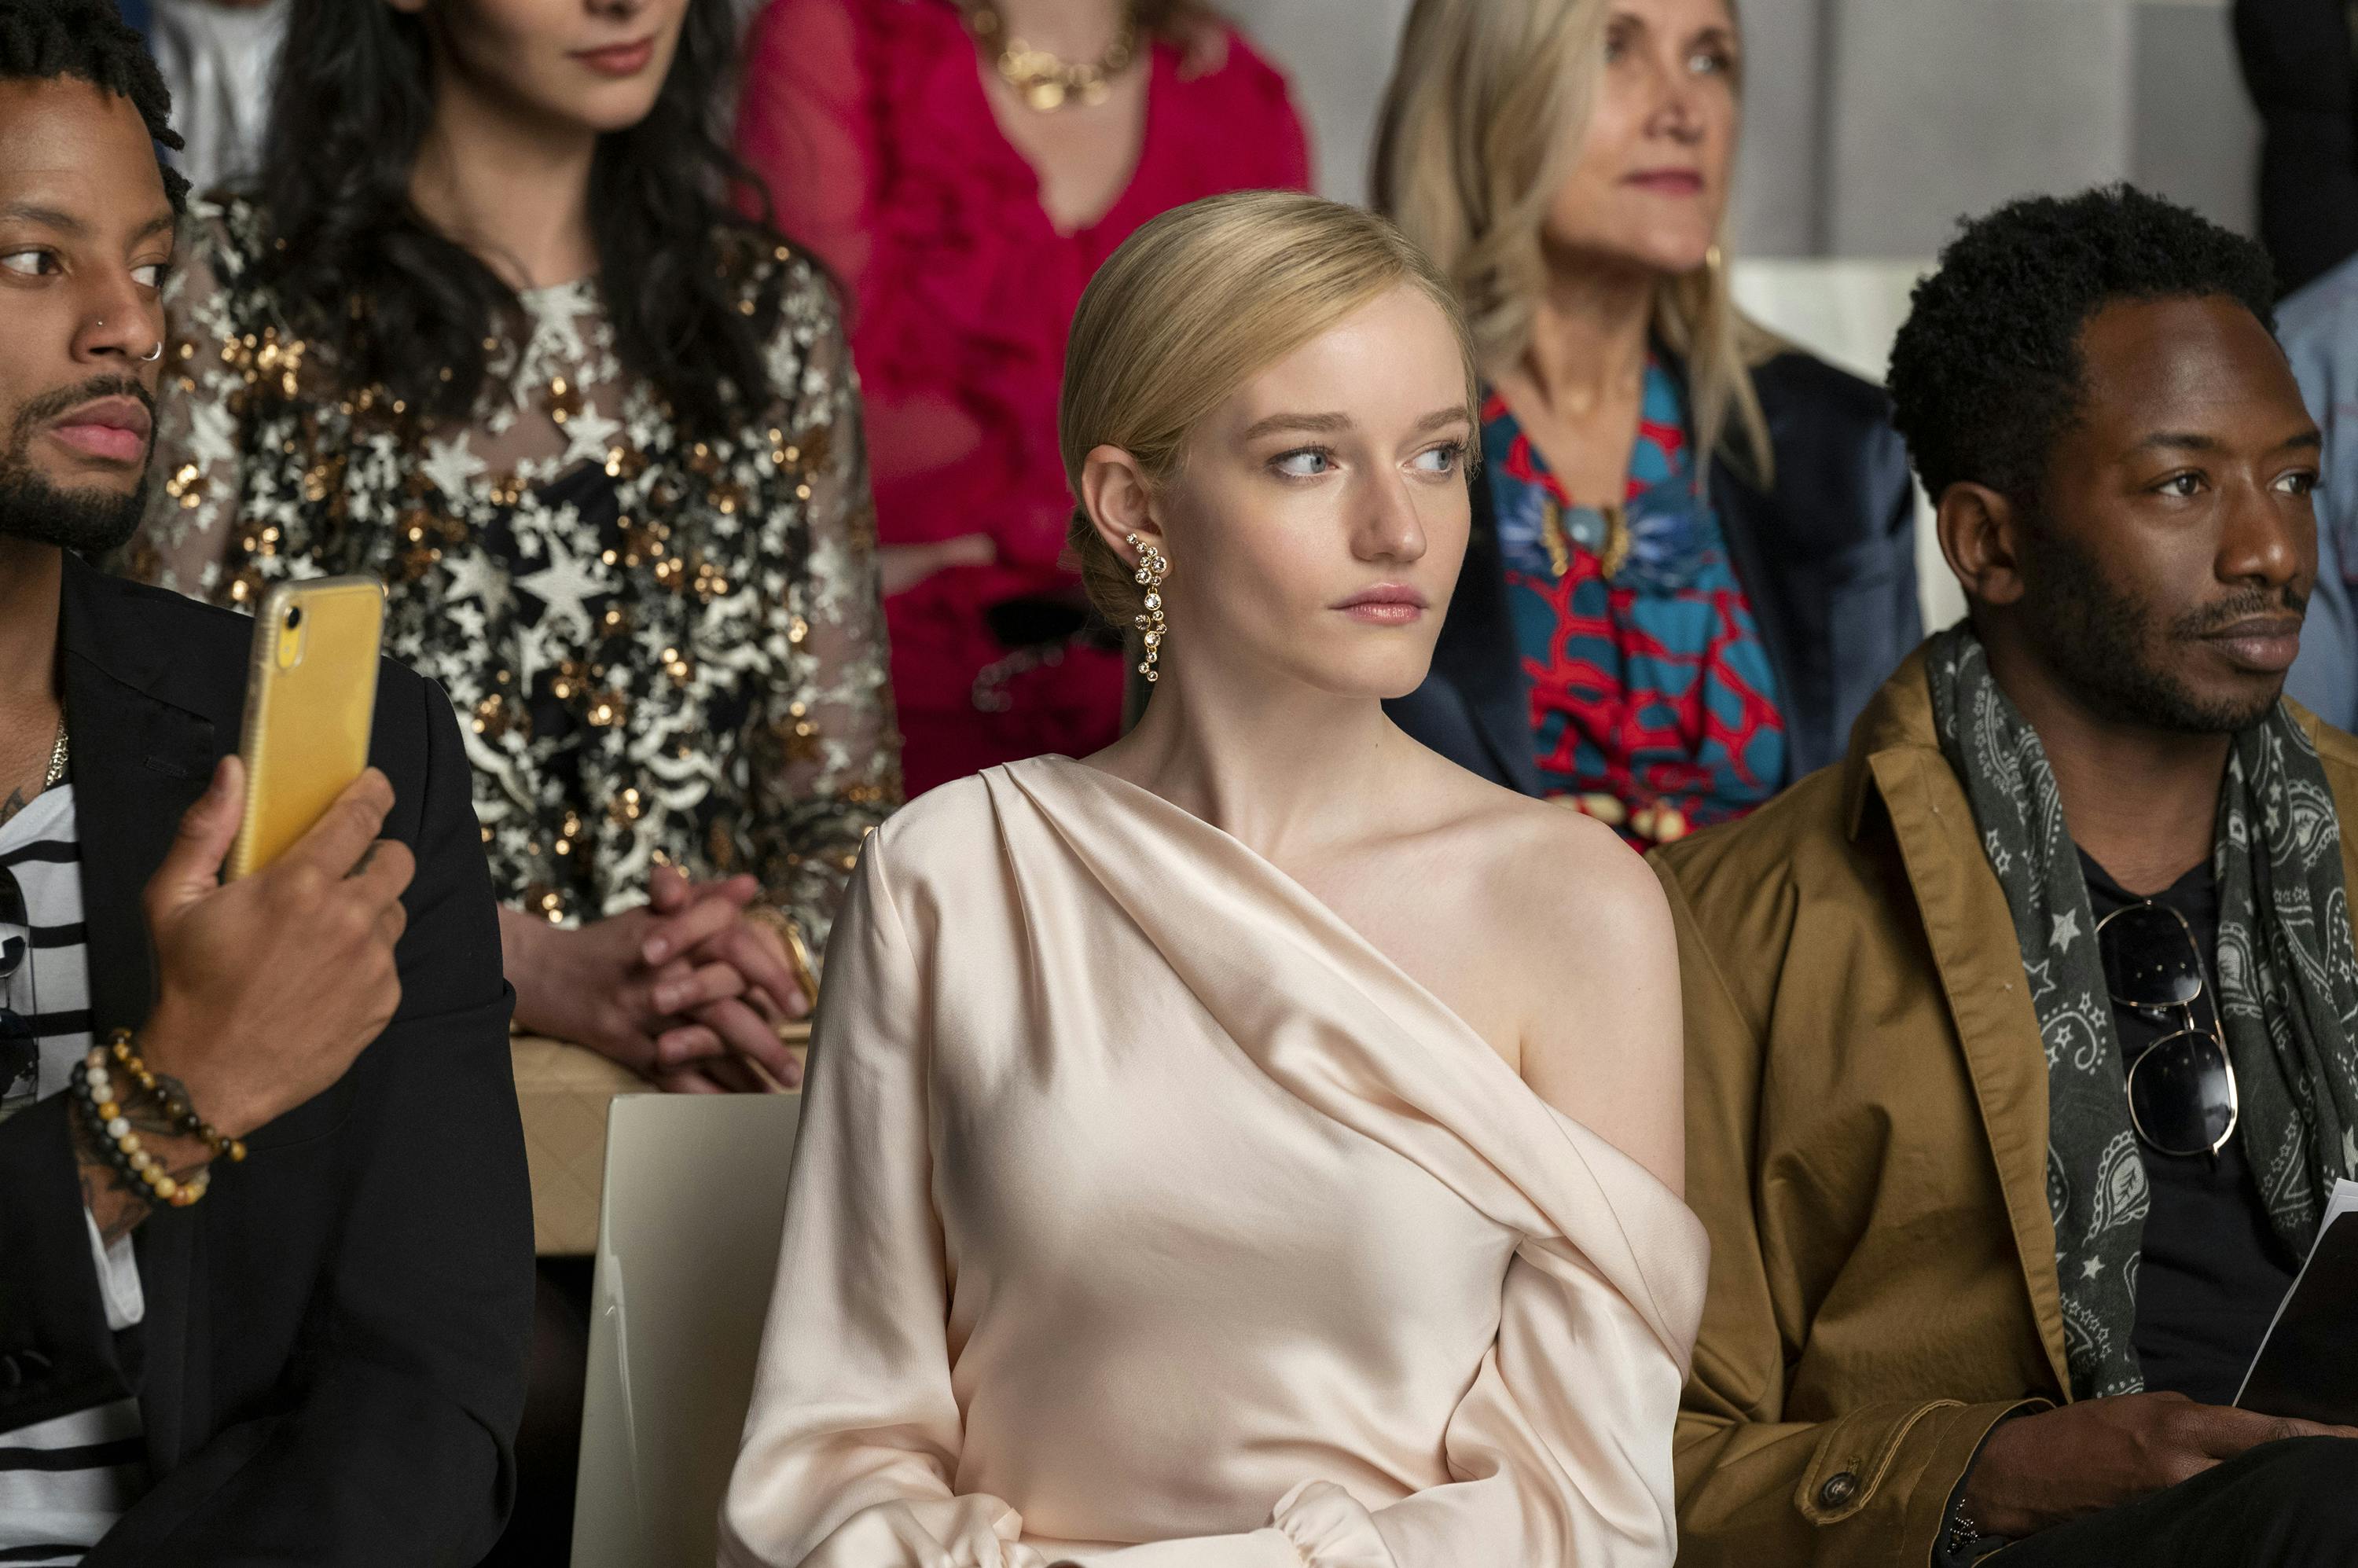 Anna Delvey wears a pale pink dress and sits front row at a fashion show.